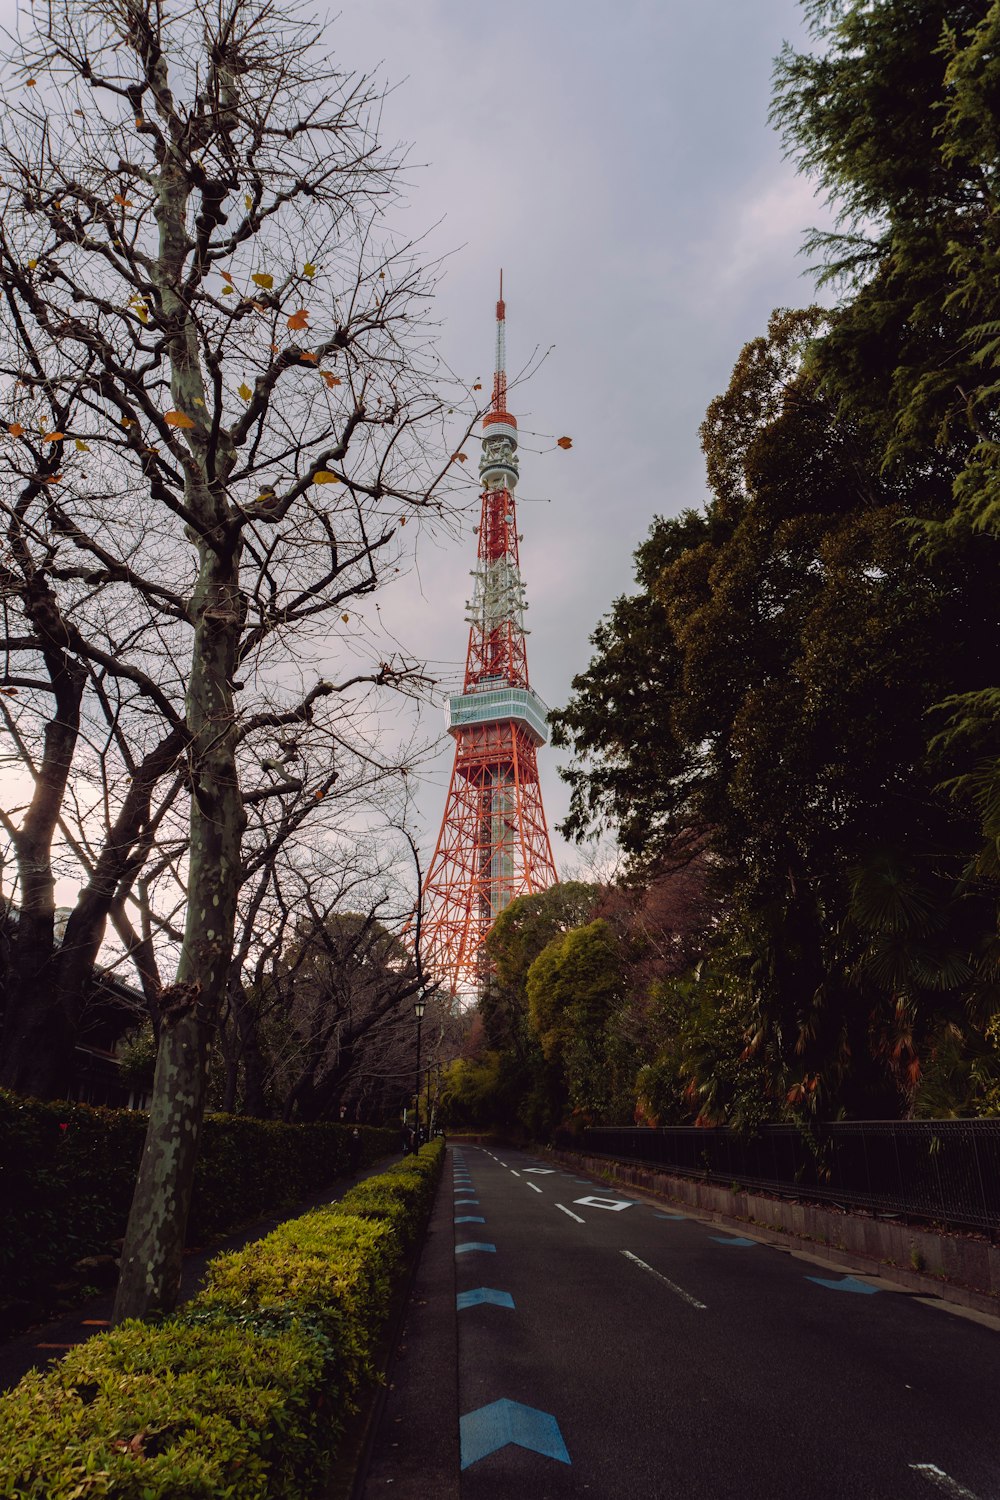 red and white tower near green trees during daytime